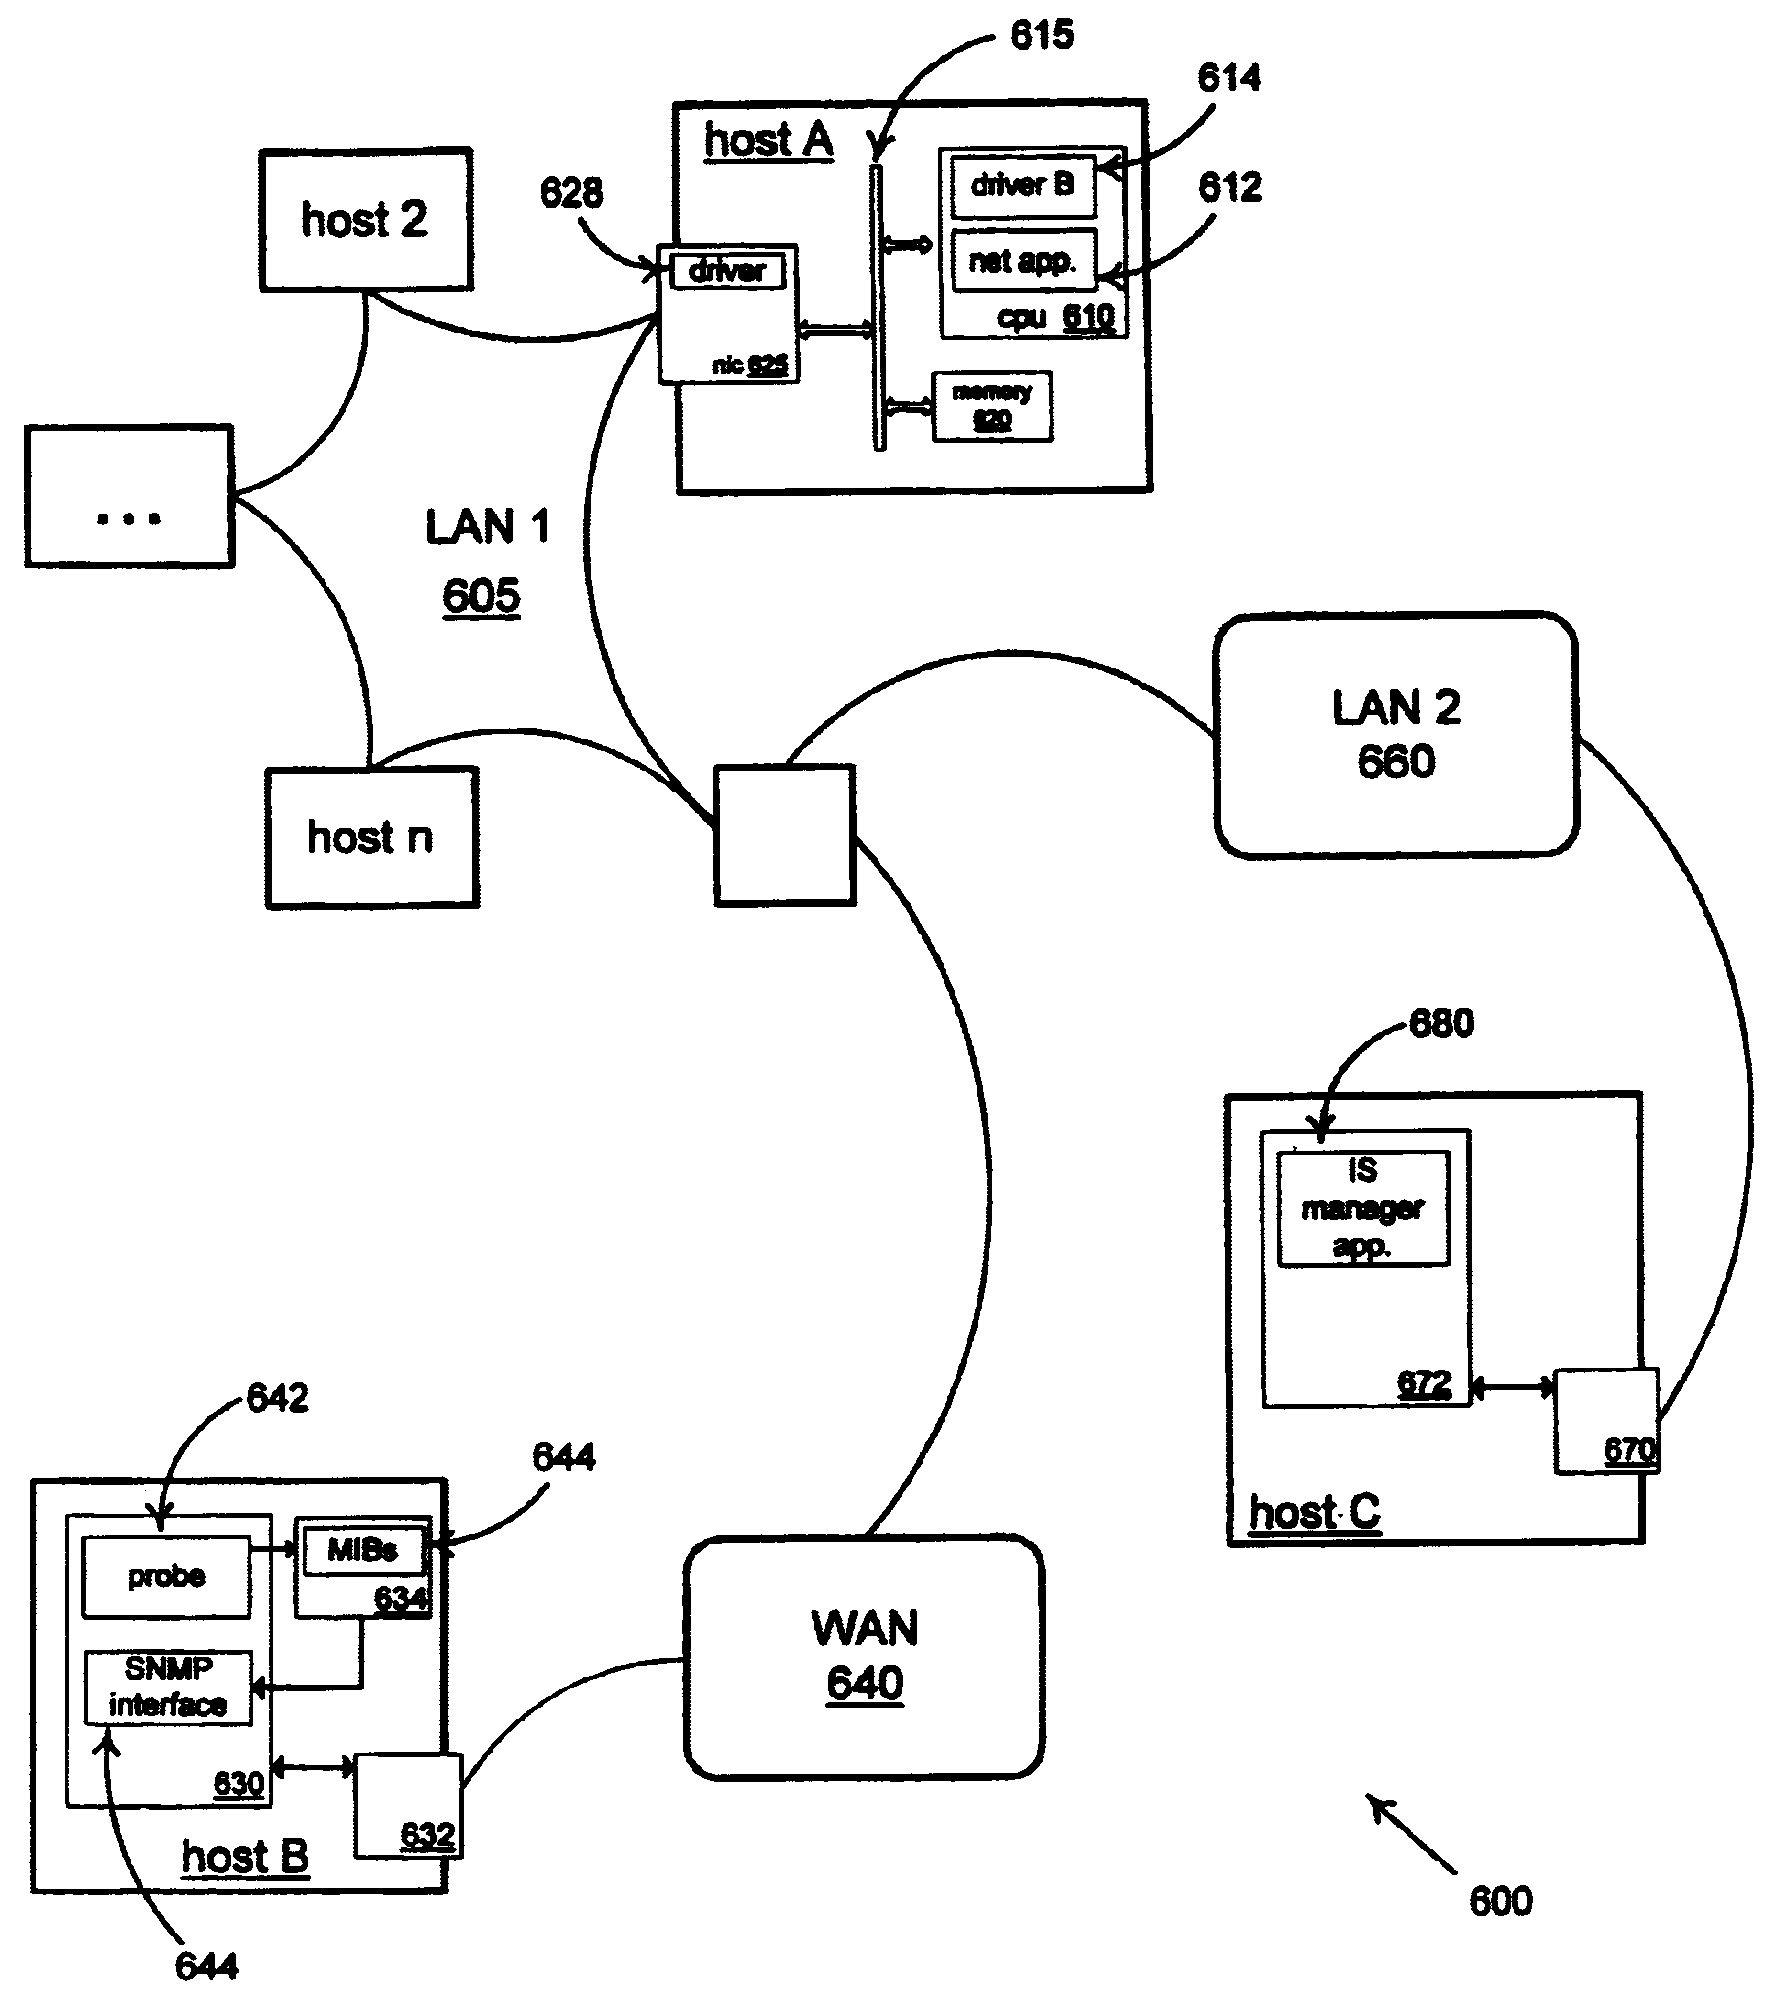 Method for correlating and presenting network management data